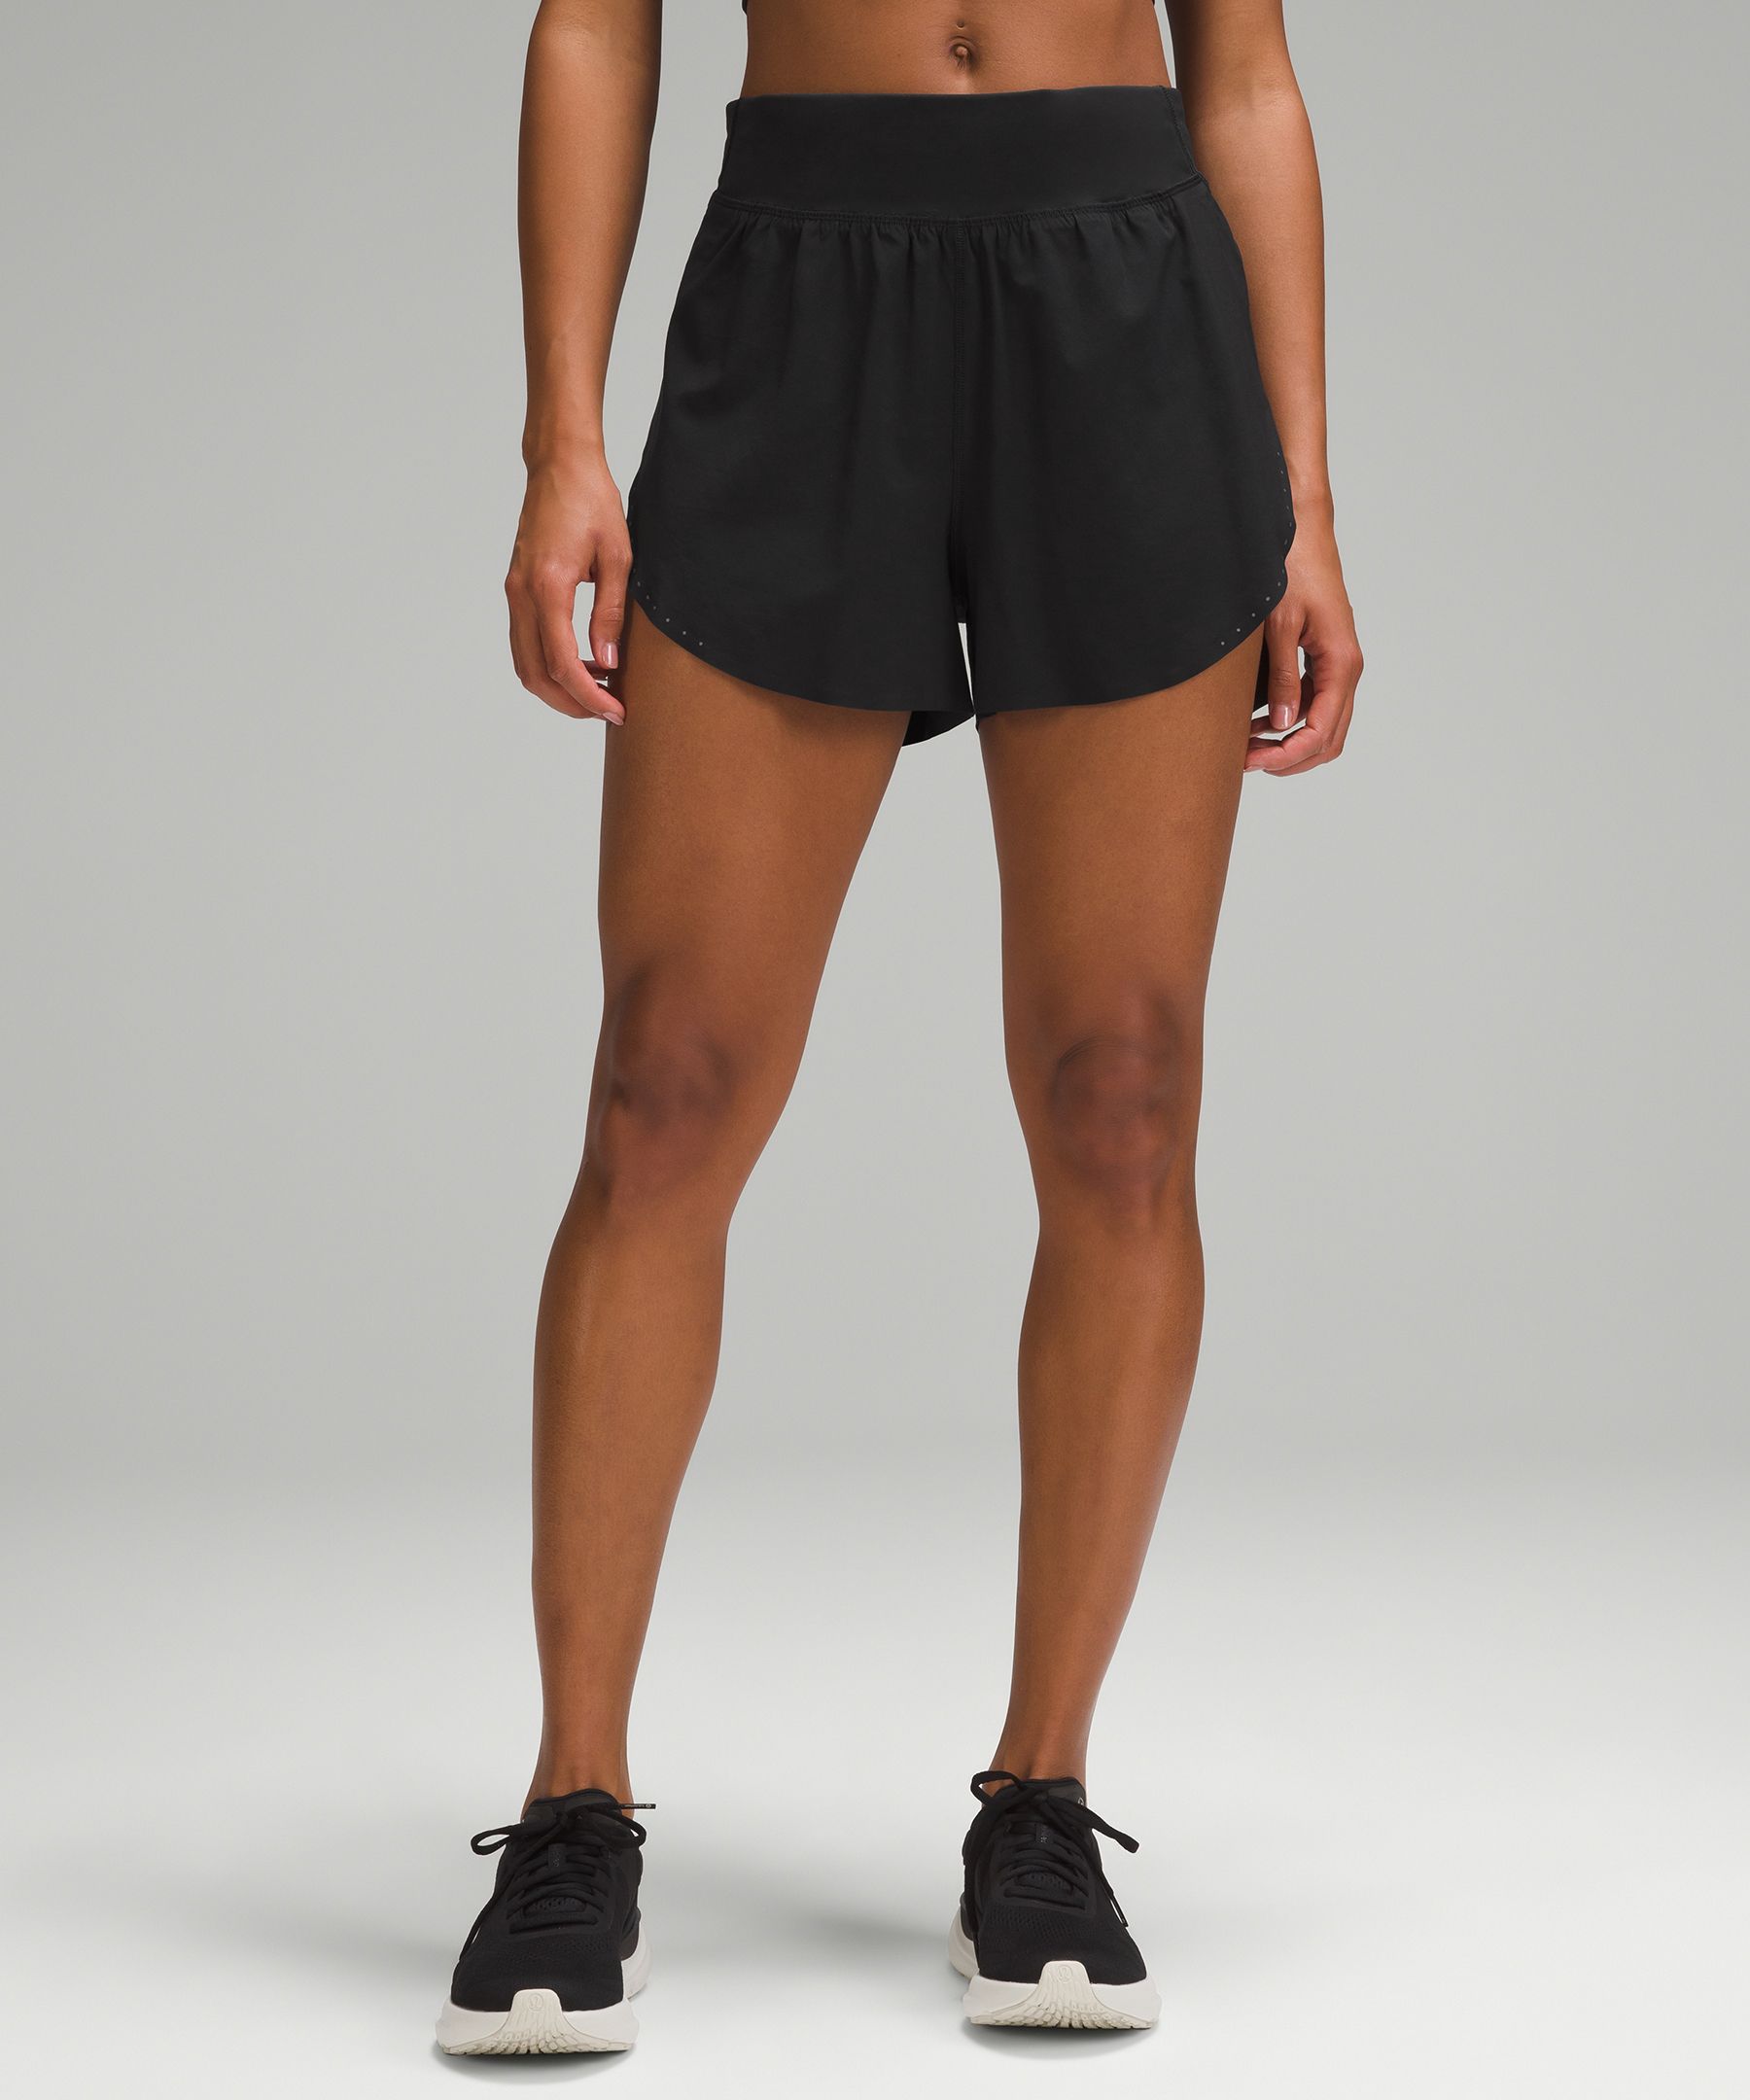 Fast and Free High-Rise Short 8, Women's Shorts